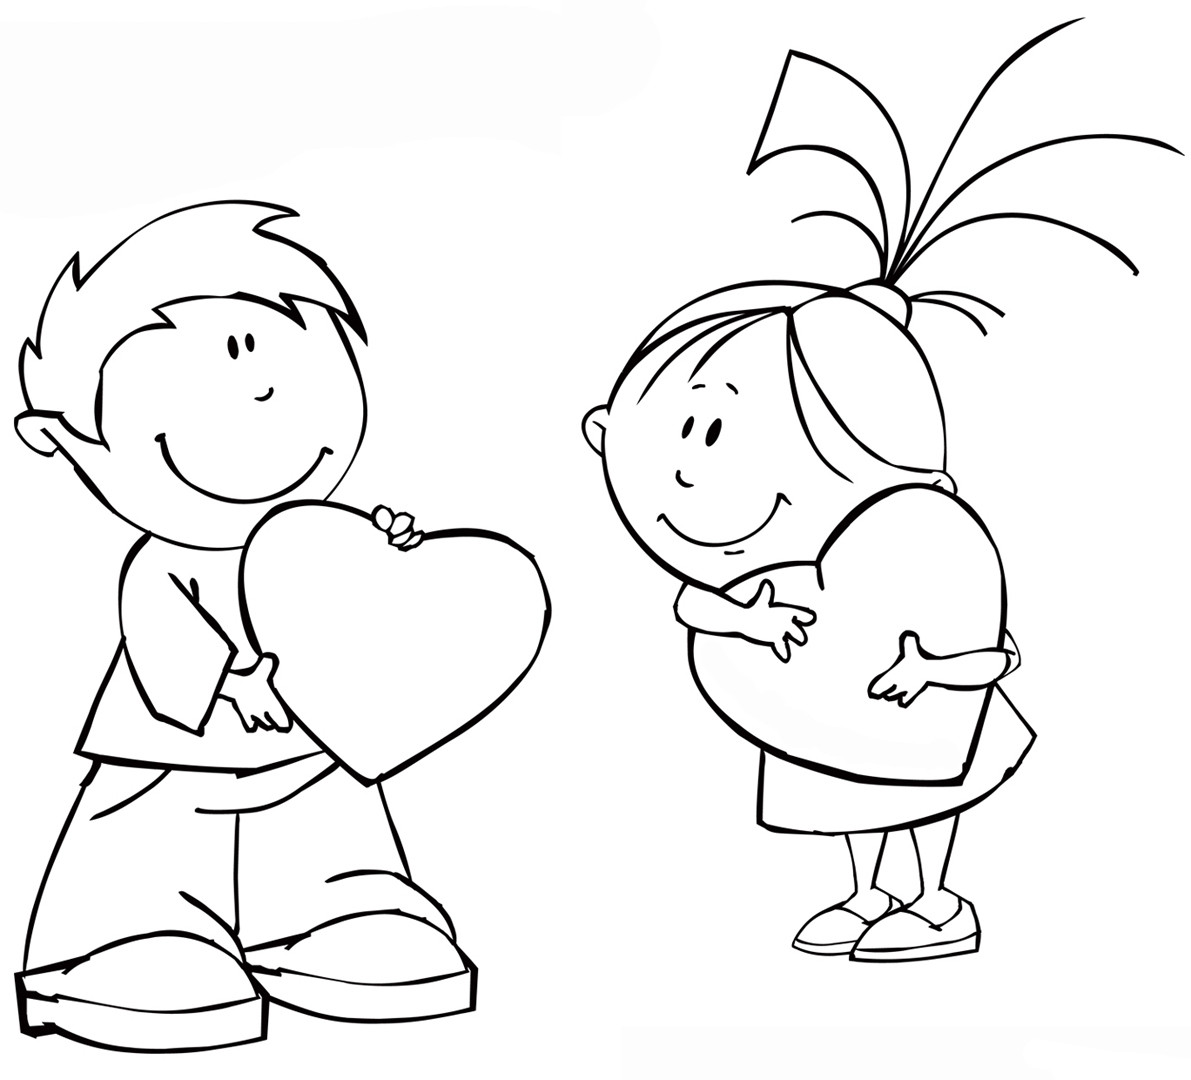 Coloring Pages For Boys And Girls
 Girl and boy coloring pages to and print for free